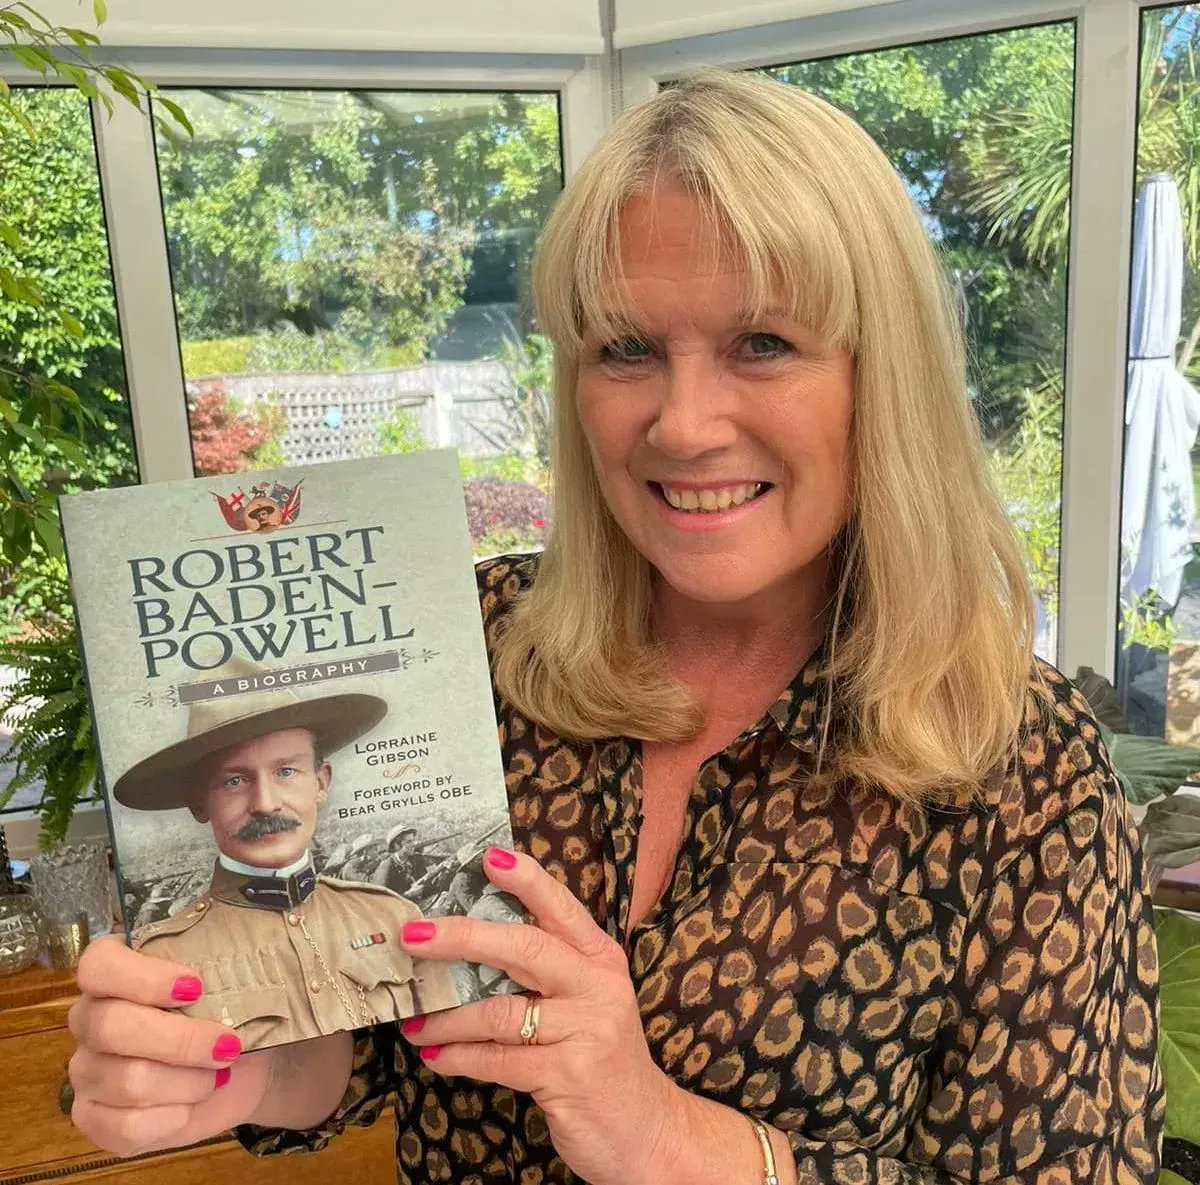 #InThePress As seen in the New Stour & Avon Magazine: Robert Baden-Powell – A Biography by @LorraineJourno 📖  

Check out issue 34 online – turn to page 44 ➡️ buff.ly/3dOwGMT